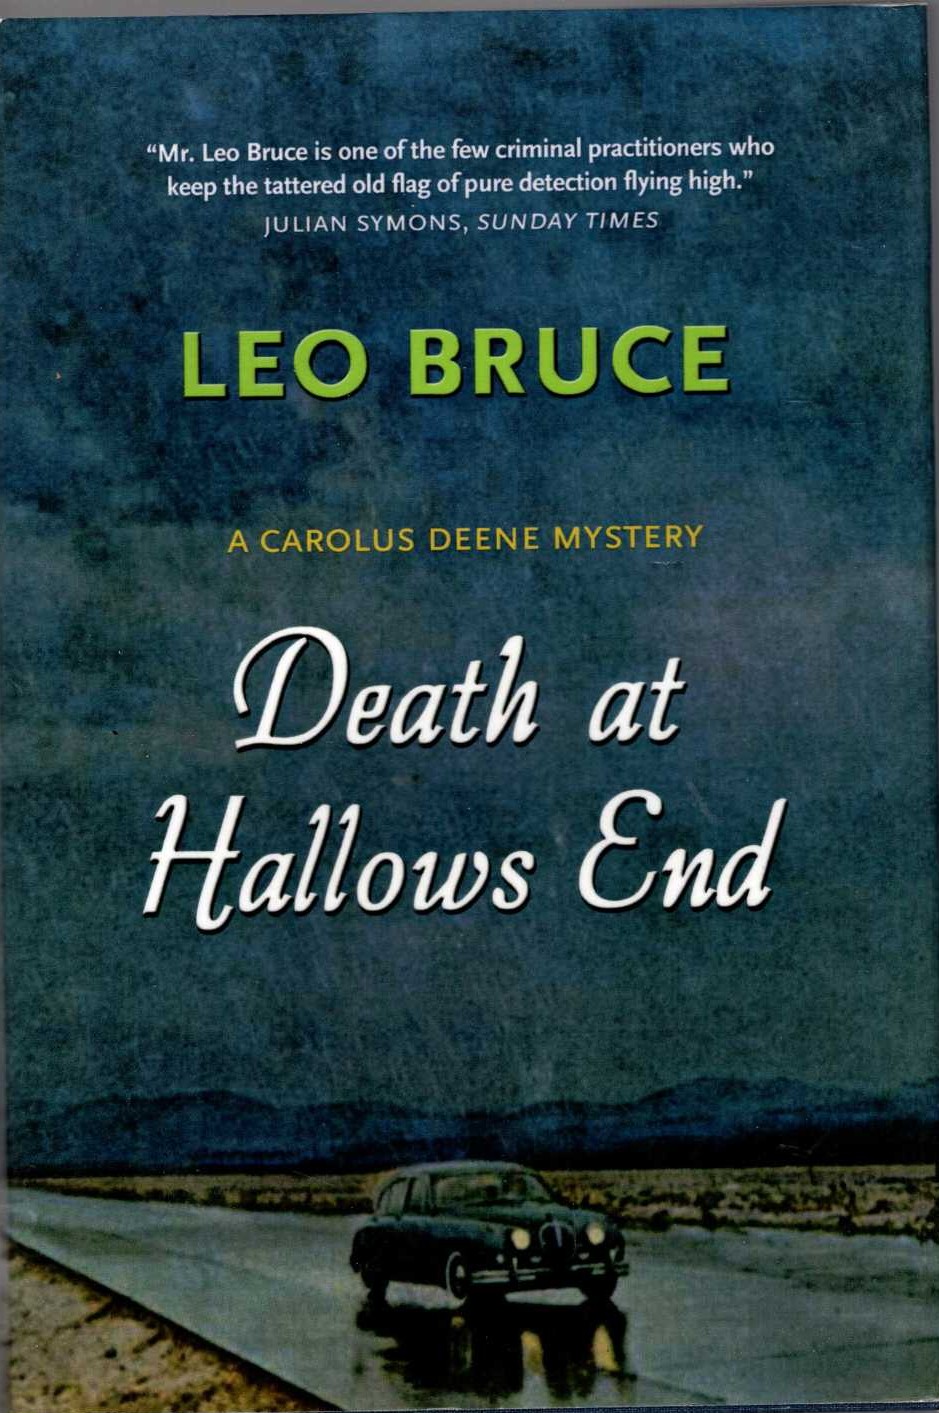 DEATH AT HALLOWS END front book cover image